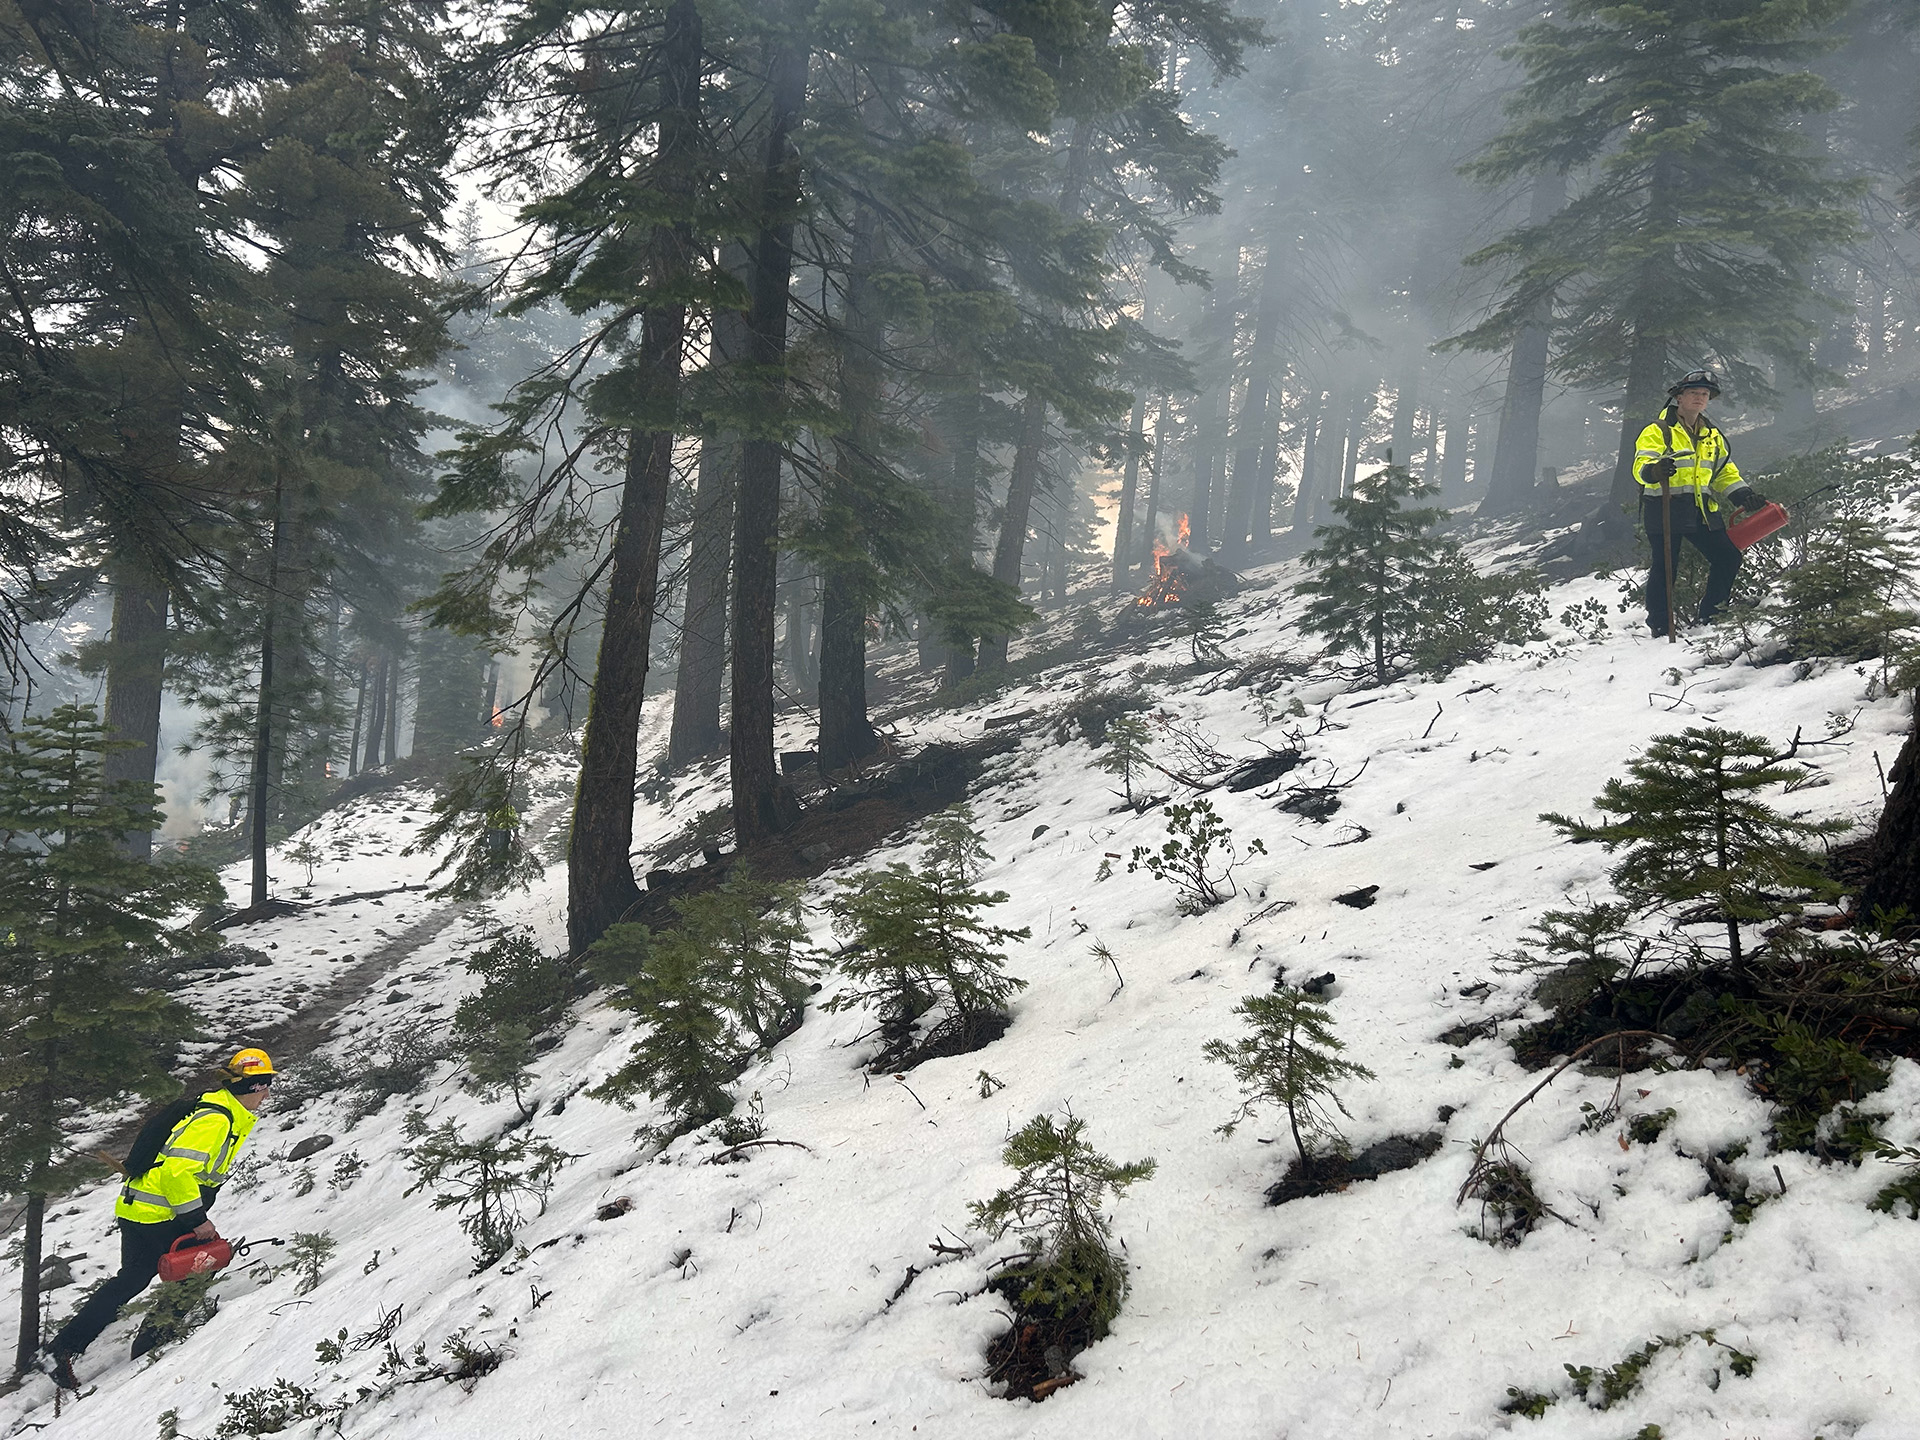 Firefighters engaged in a prescribed fire operation in a forest in winter, with snow on the ground and piles burning.